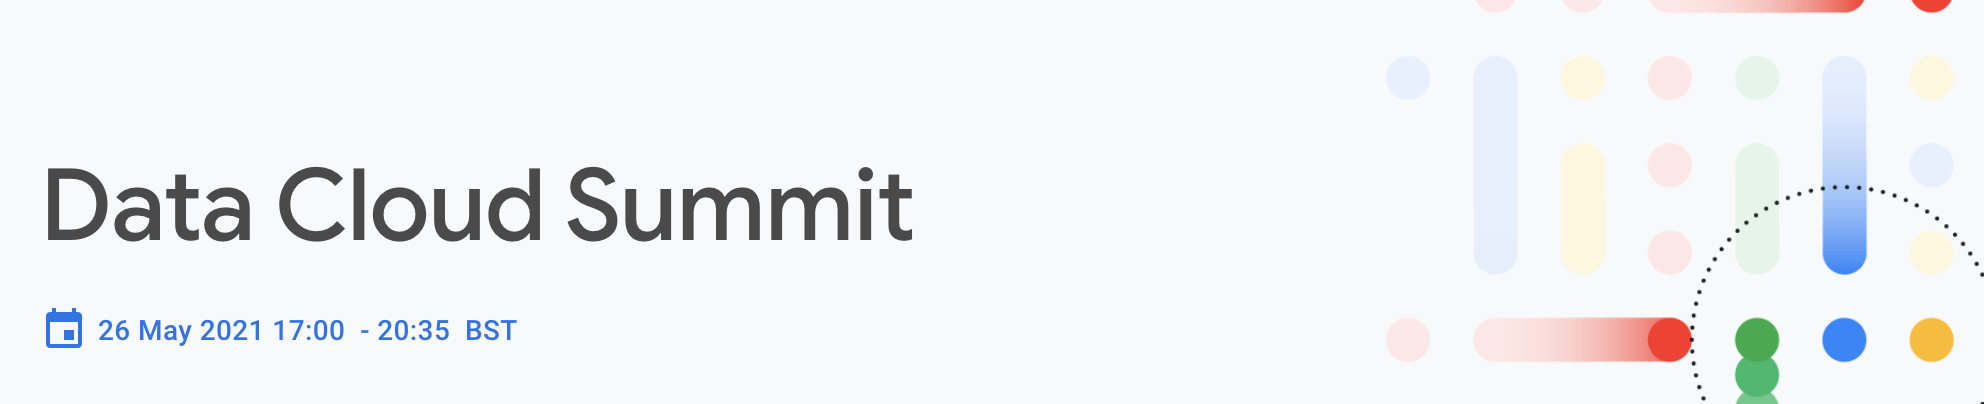 data-cloud-summit-banner.png